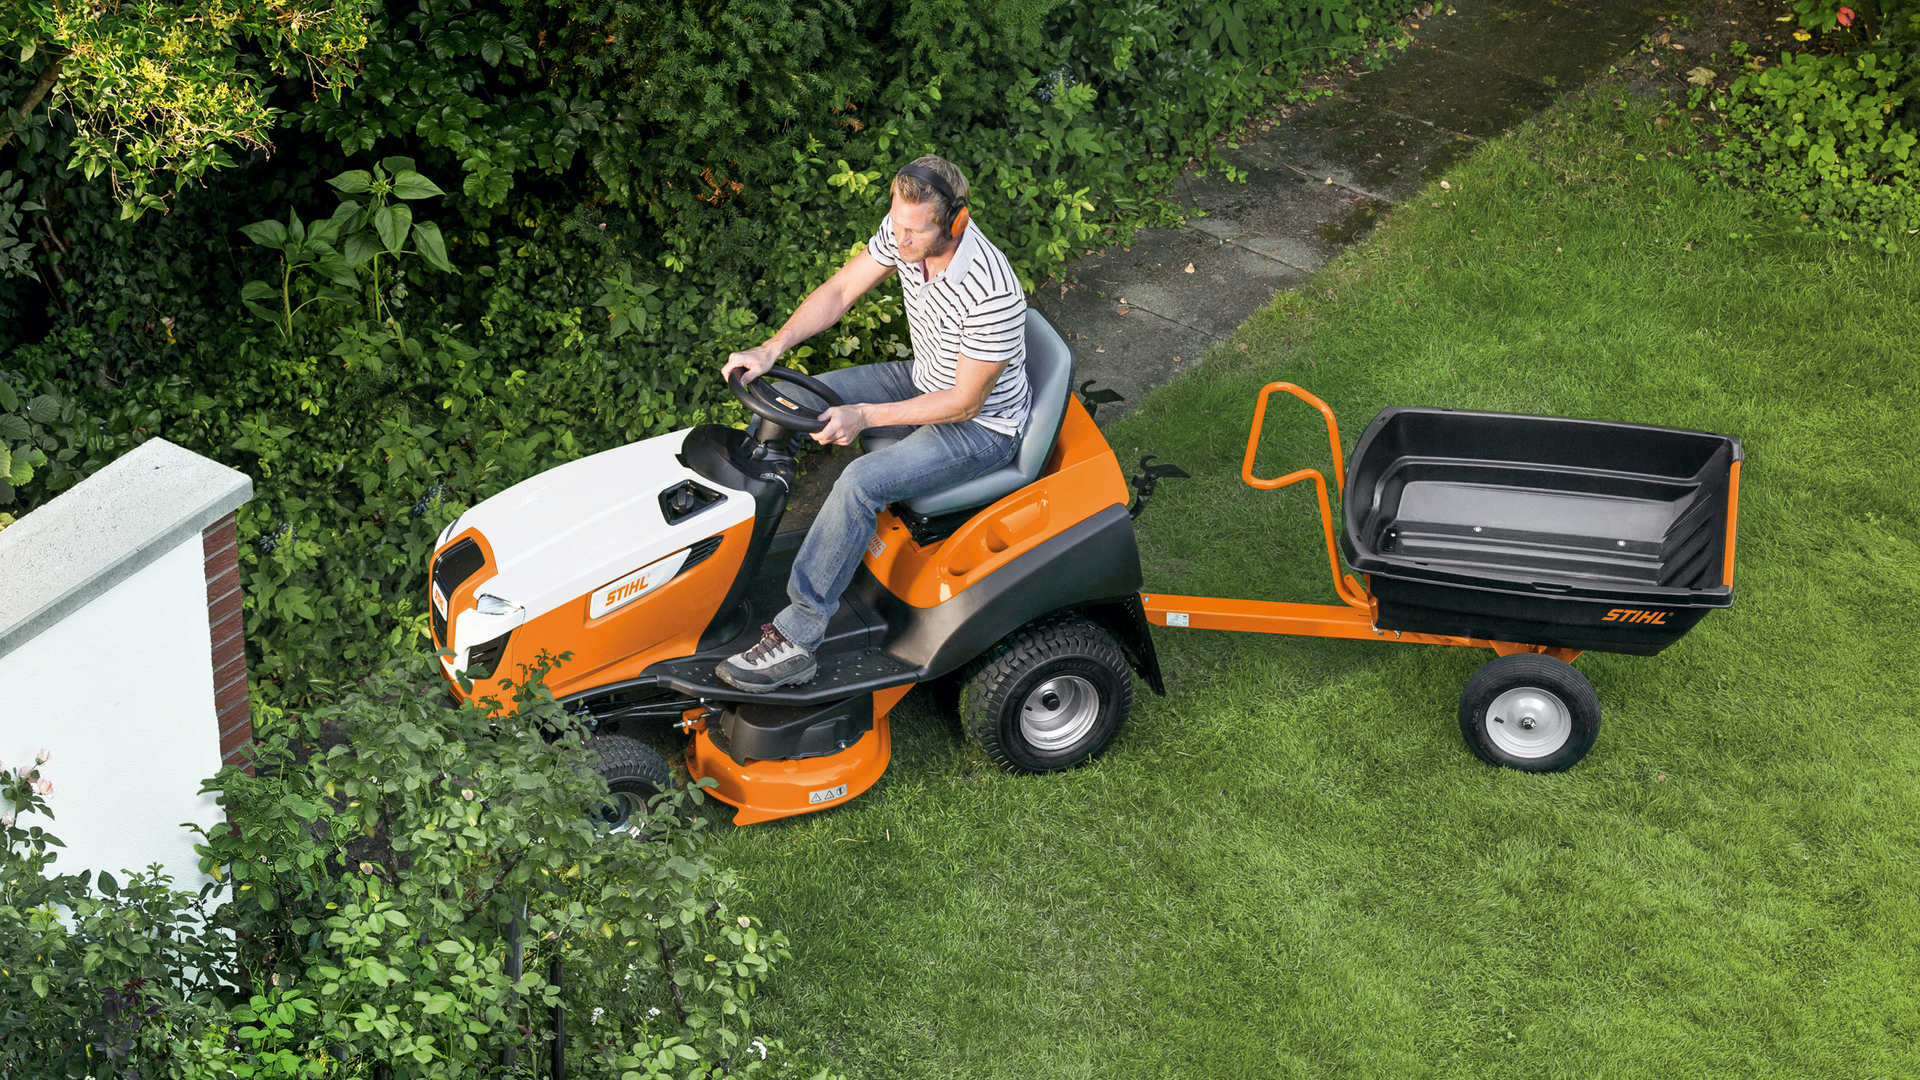 Best Ride On Lawn Mower 2020 Mini Tractors Built For Levelling